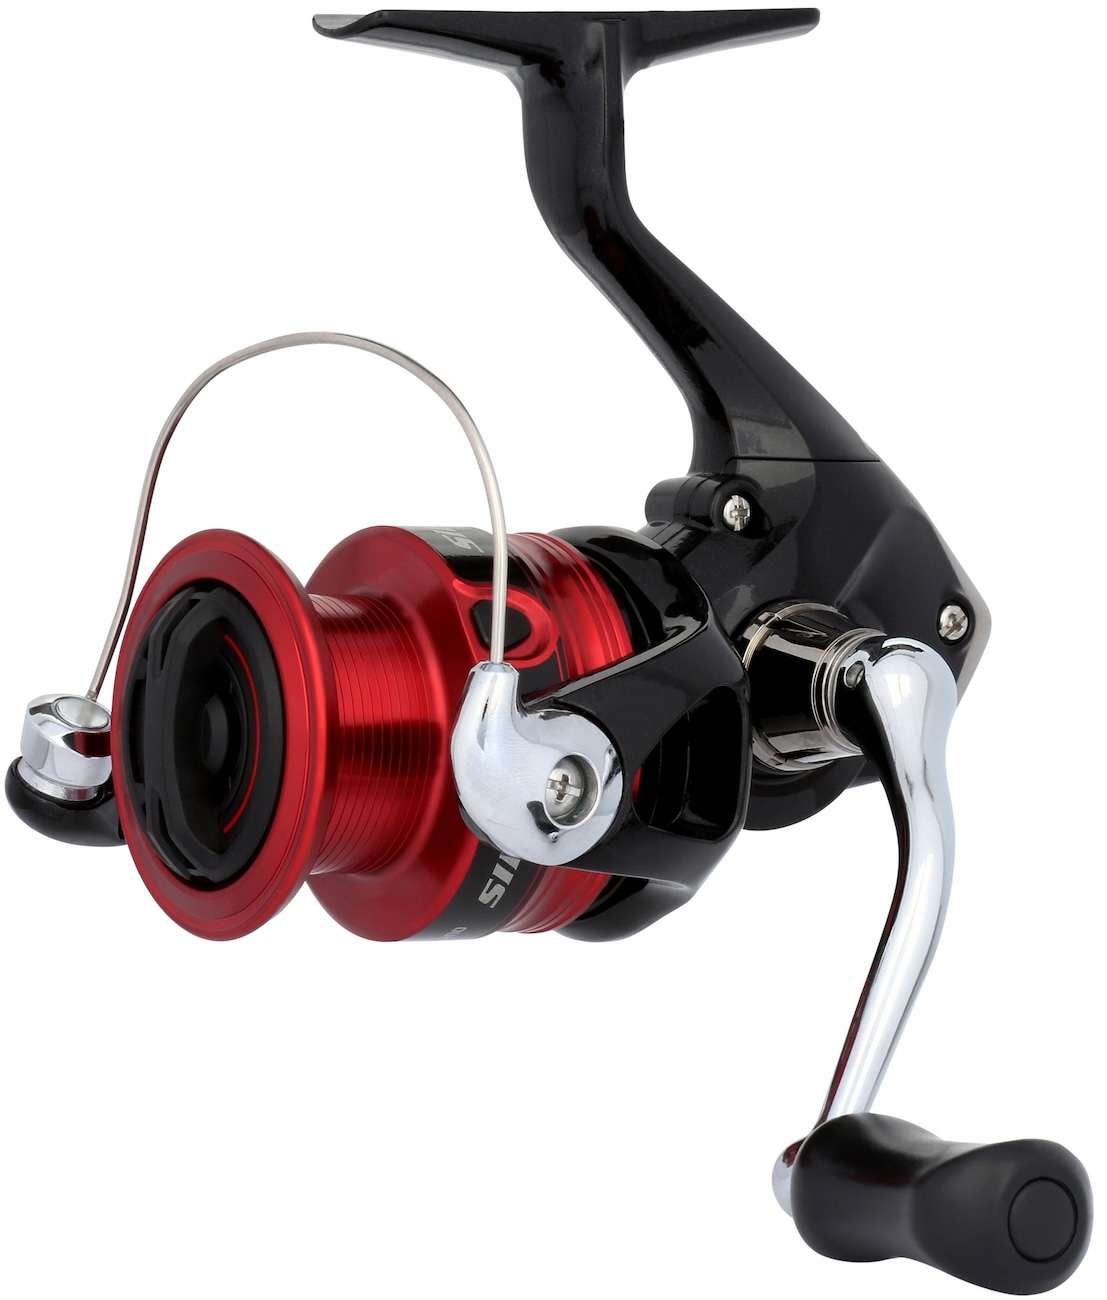 Shimano Sienna 2500 FD Front Drag Spinning Fishing Reel for sale online 